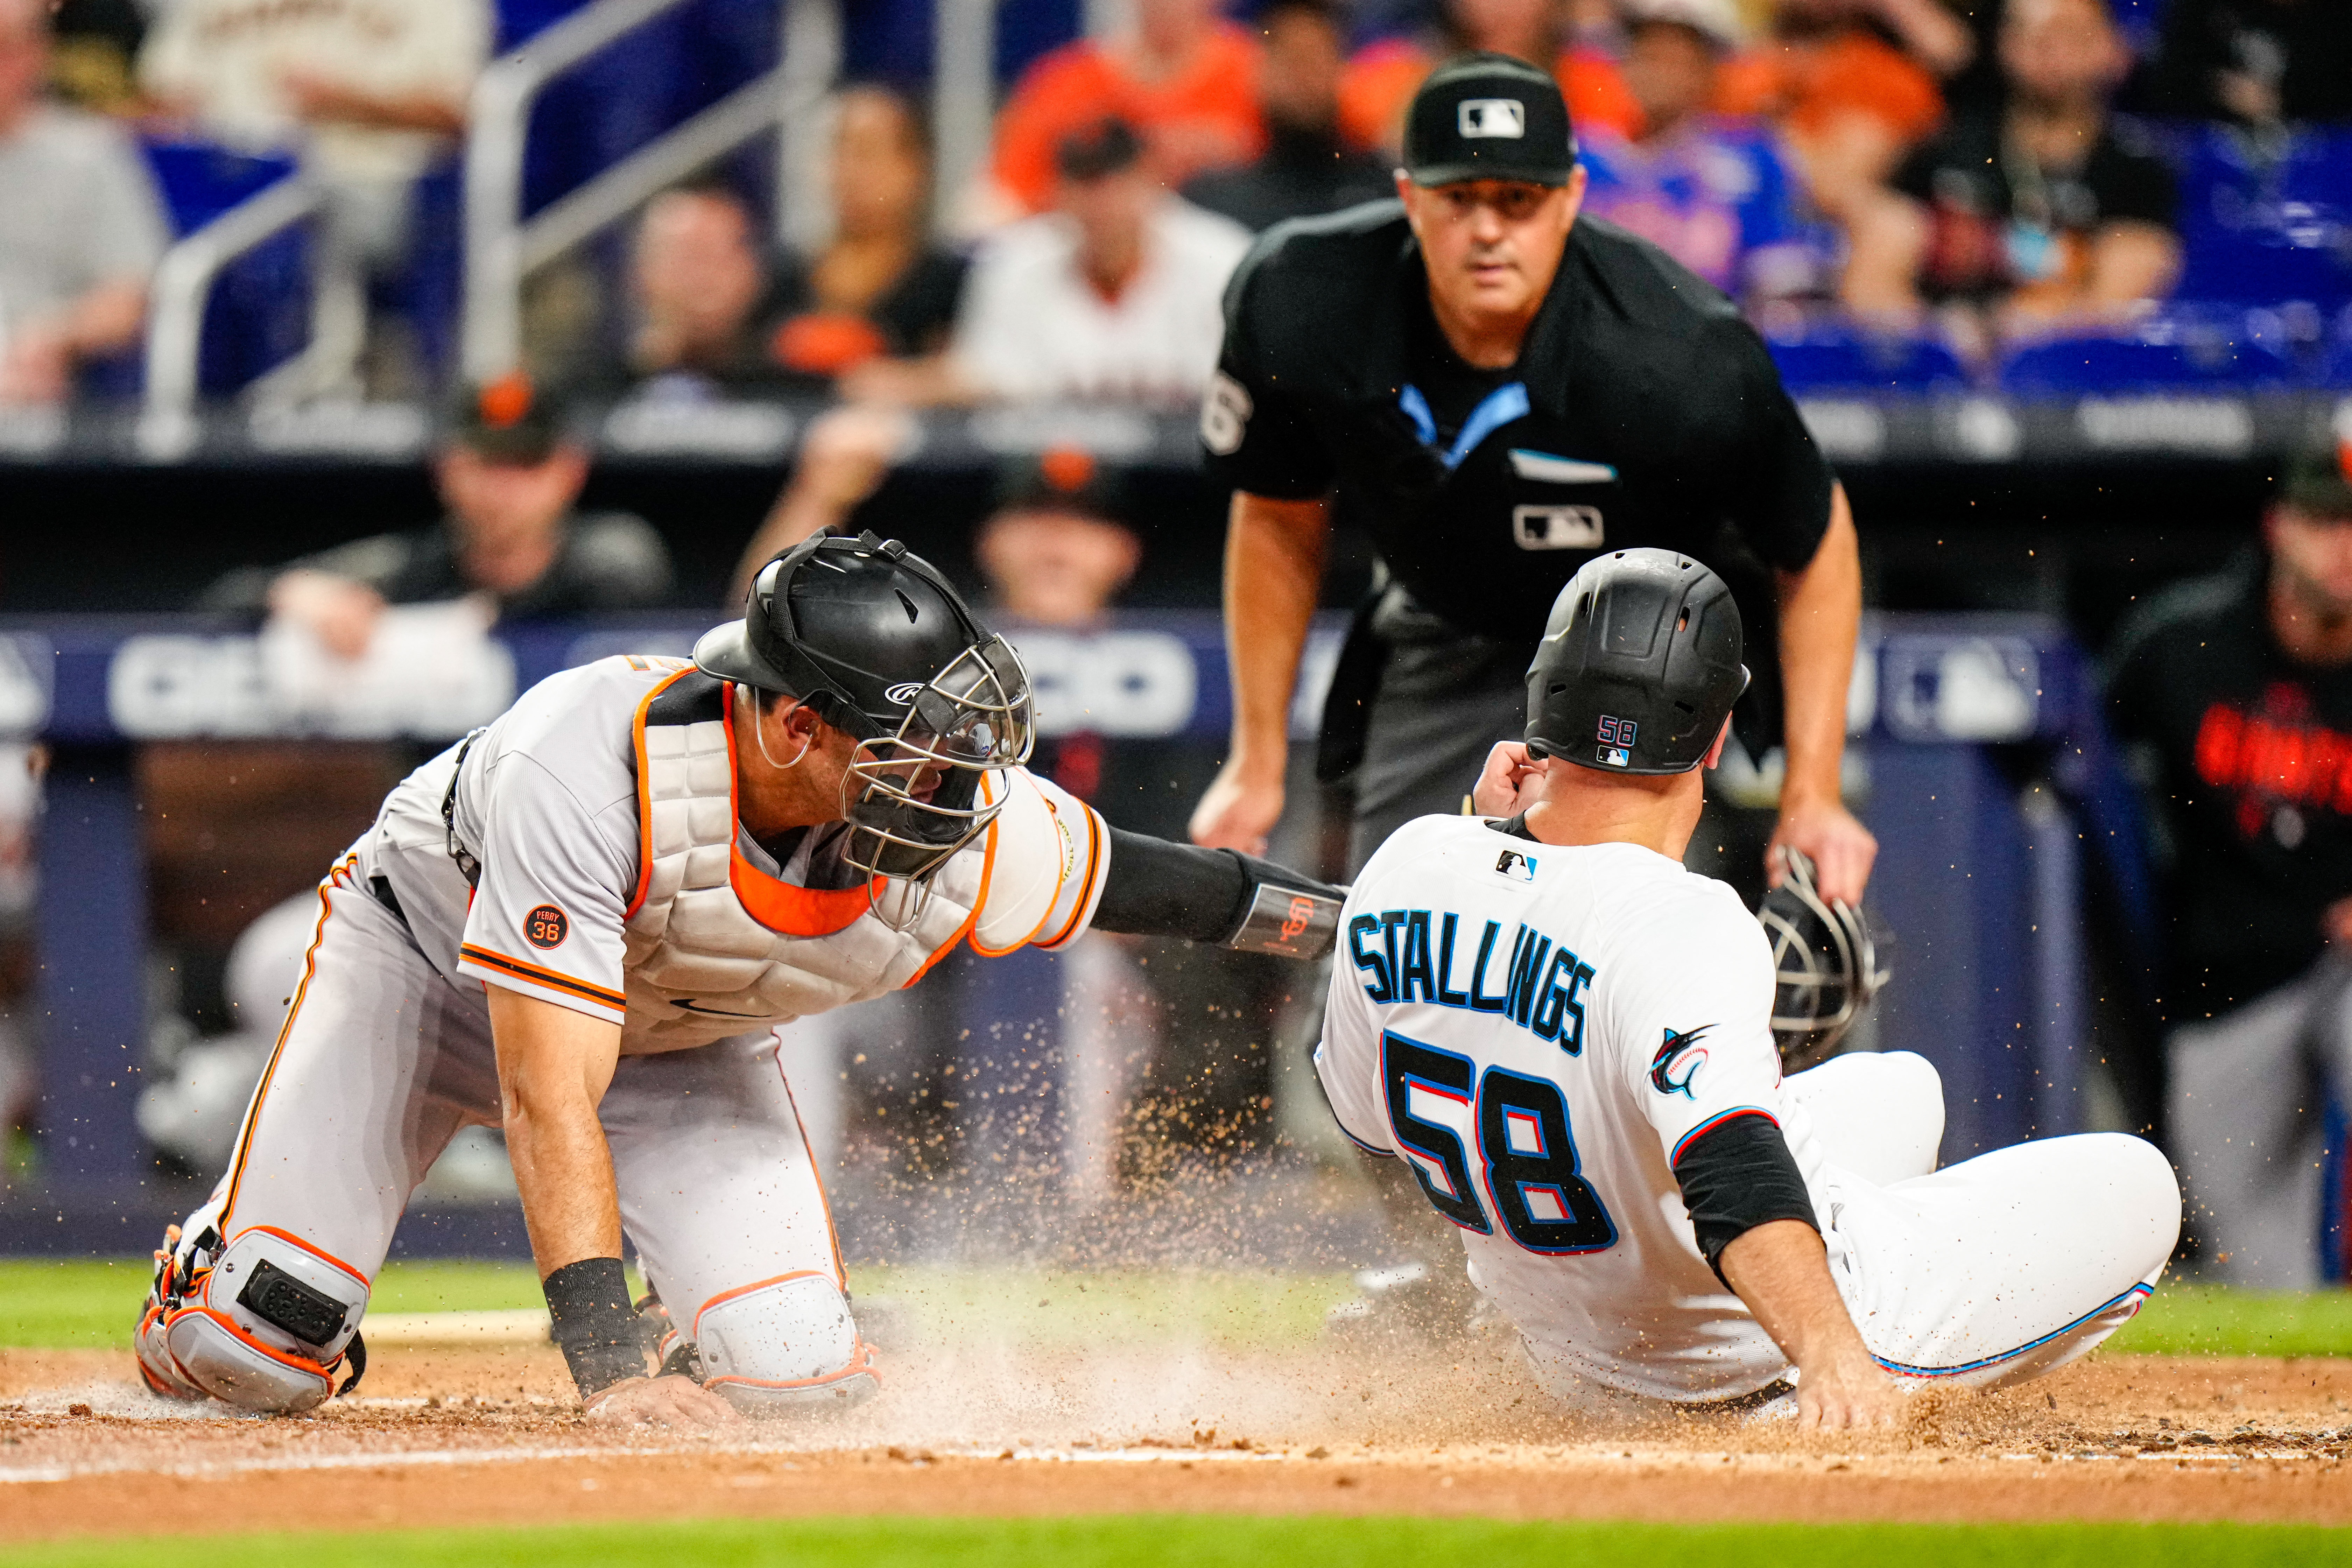 Jazz Chisholm Jr. shows out as Marlins take series against Giants